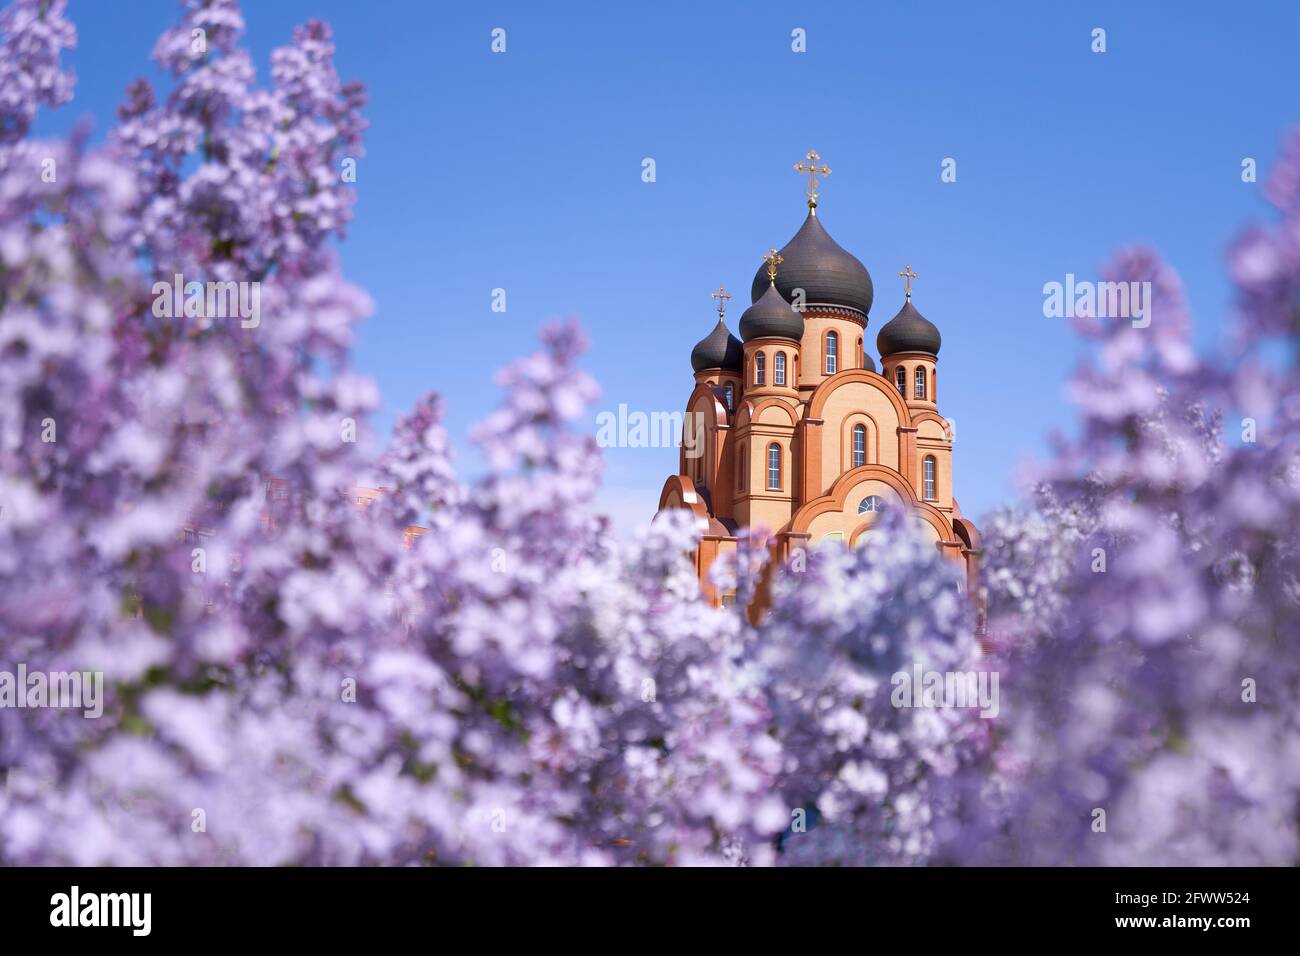 Christiany Orthodox church surrounded by blooming lilacs in spring against the blue sky Stock Photo